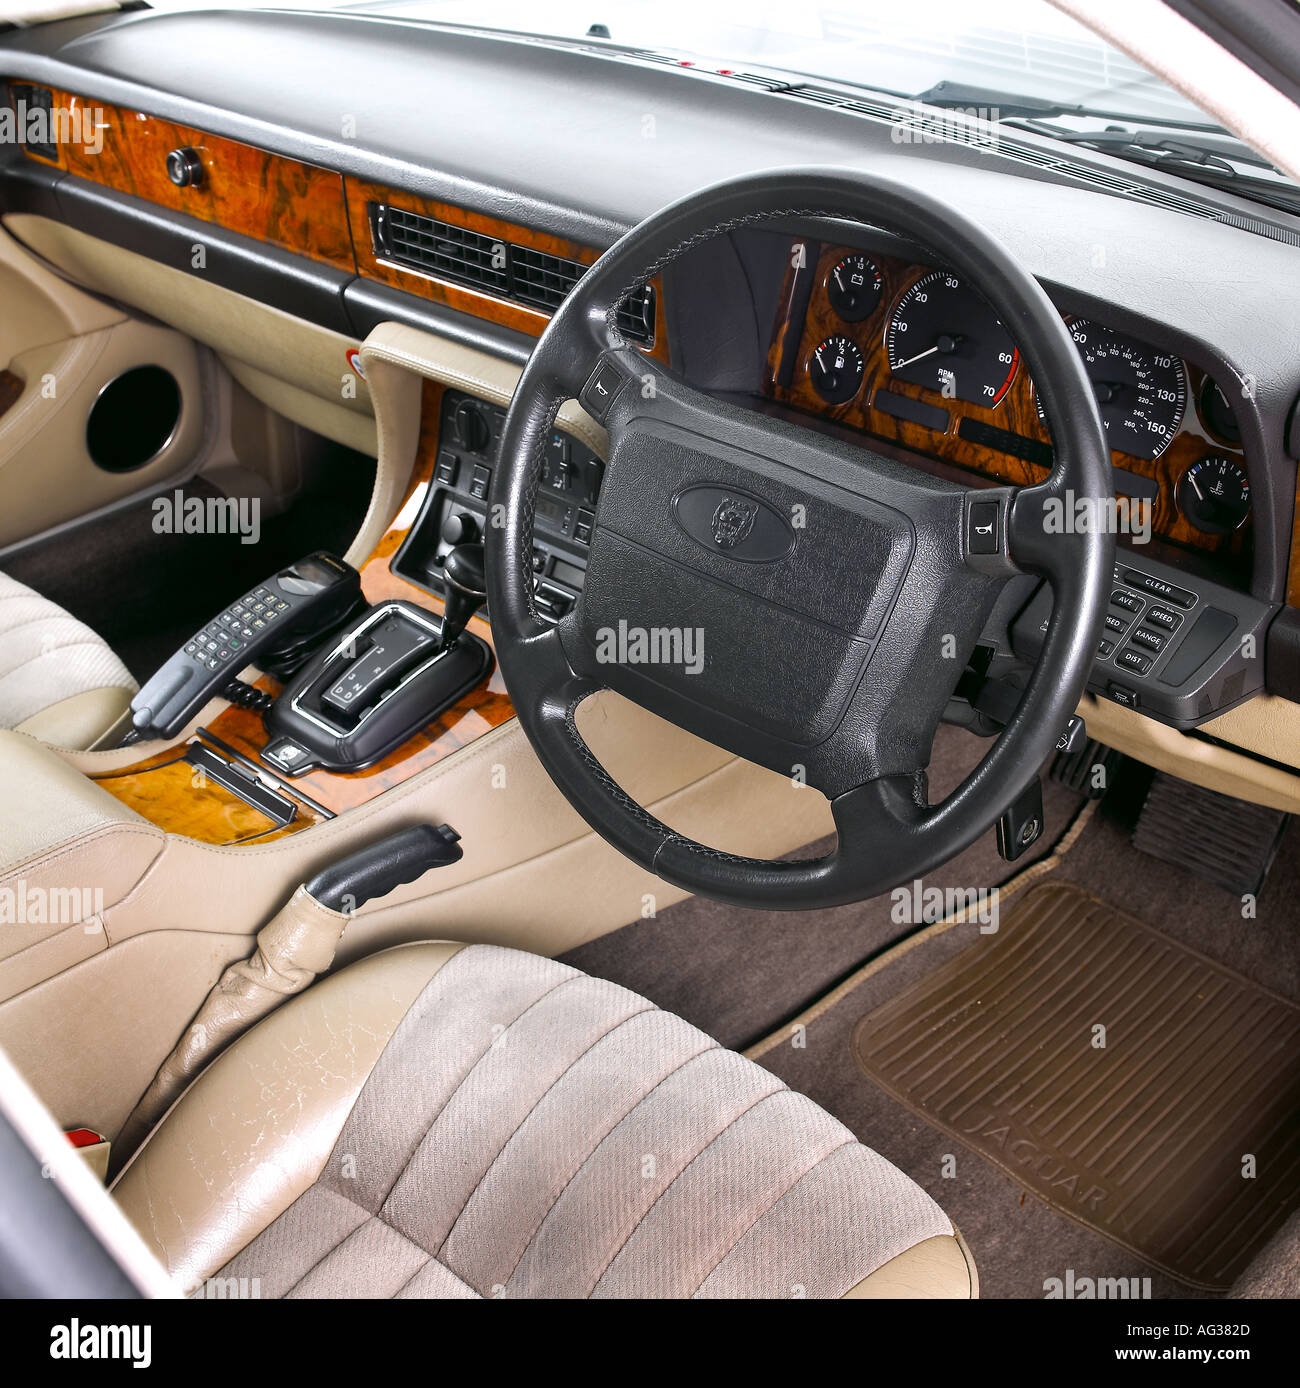 Jaguar Xj6 Interior High Resolution Stock Photography And Images